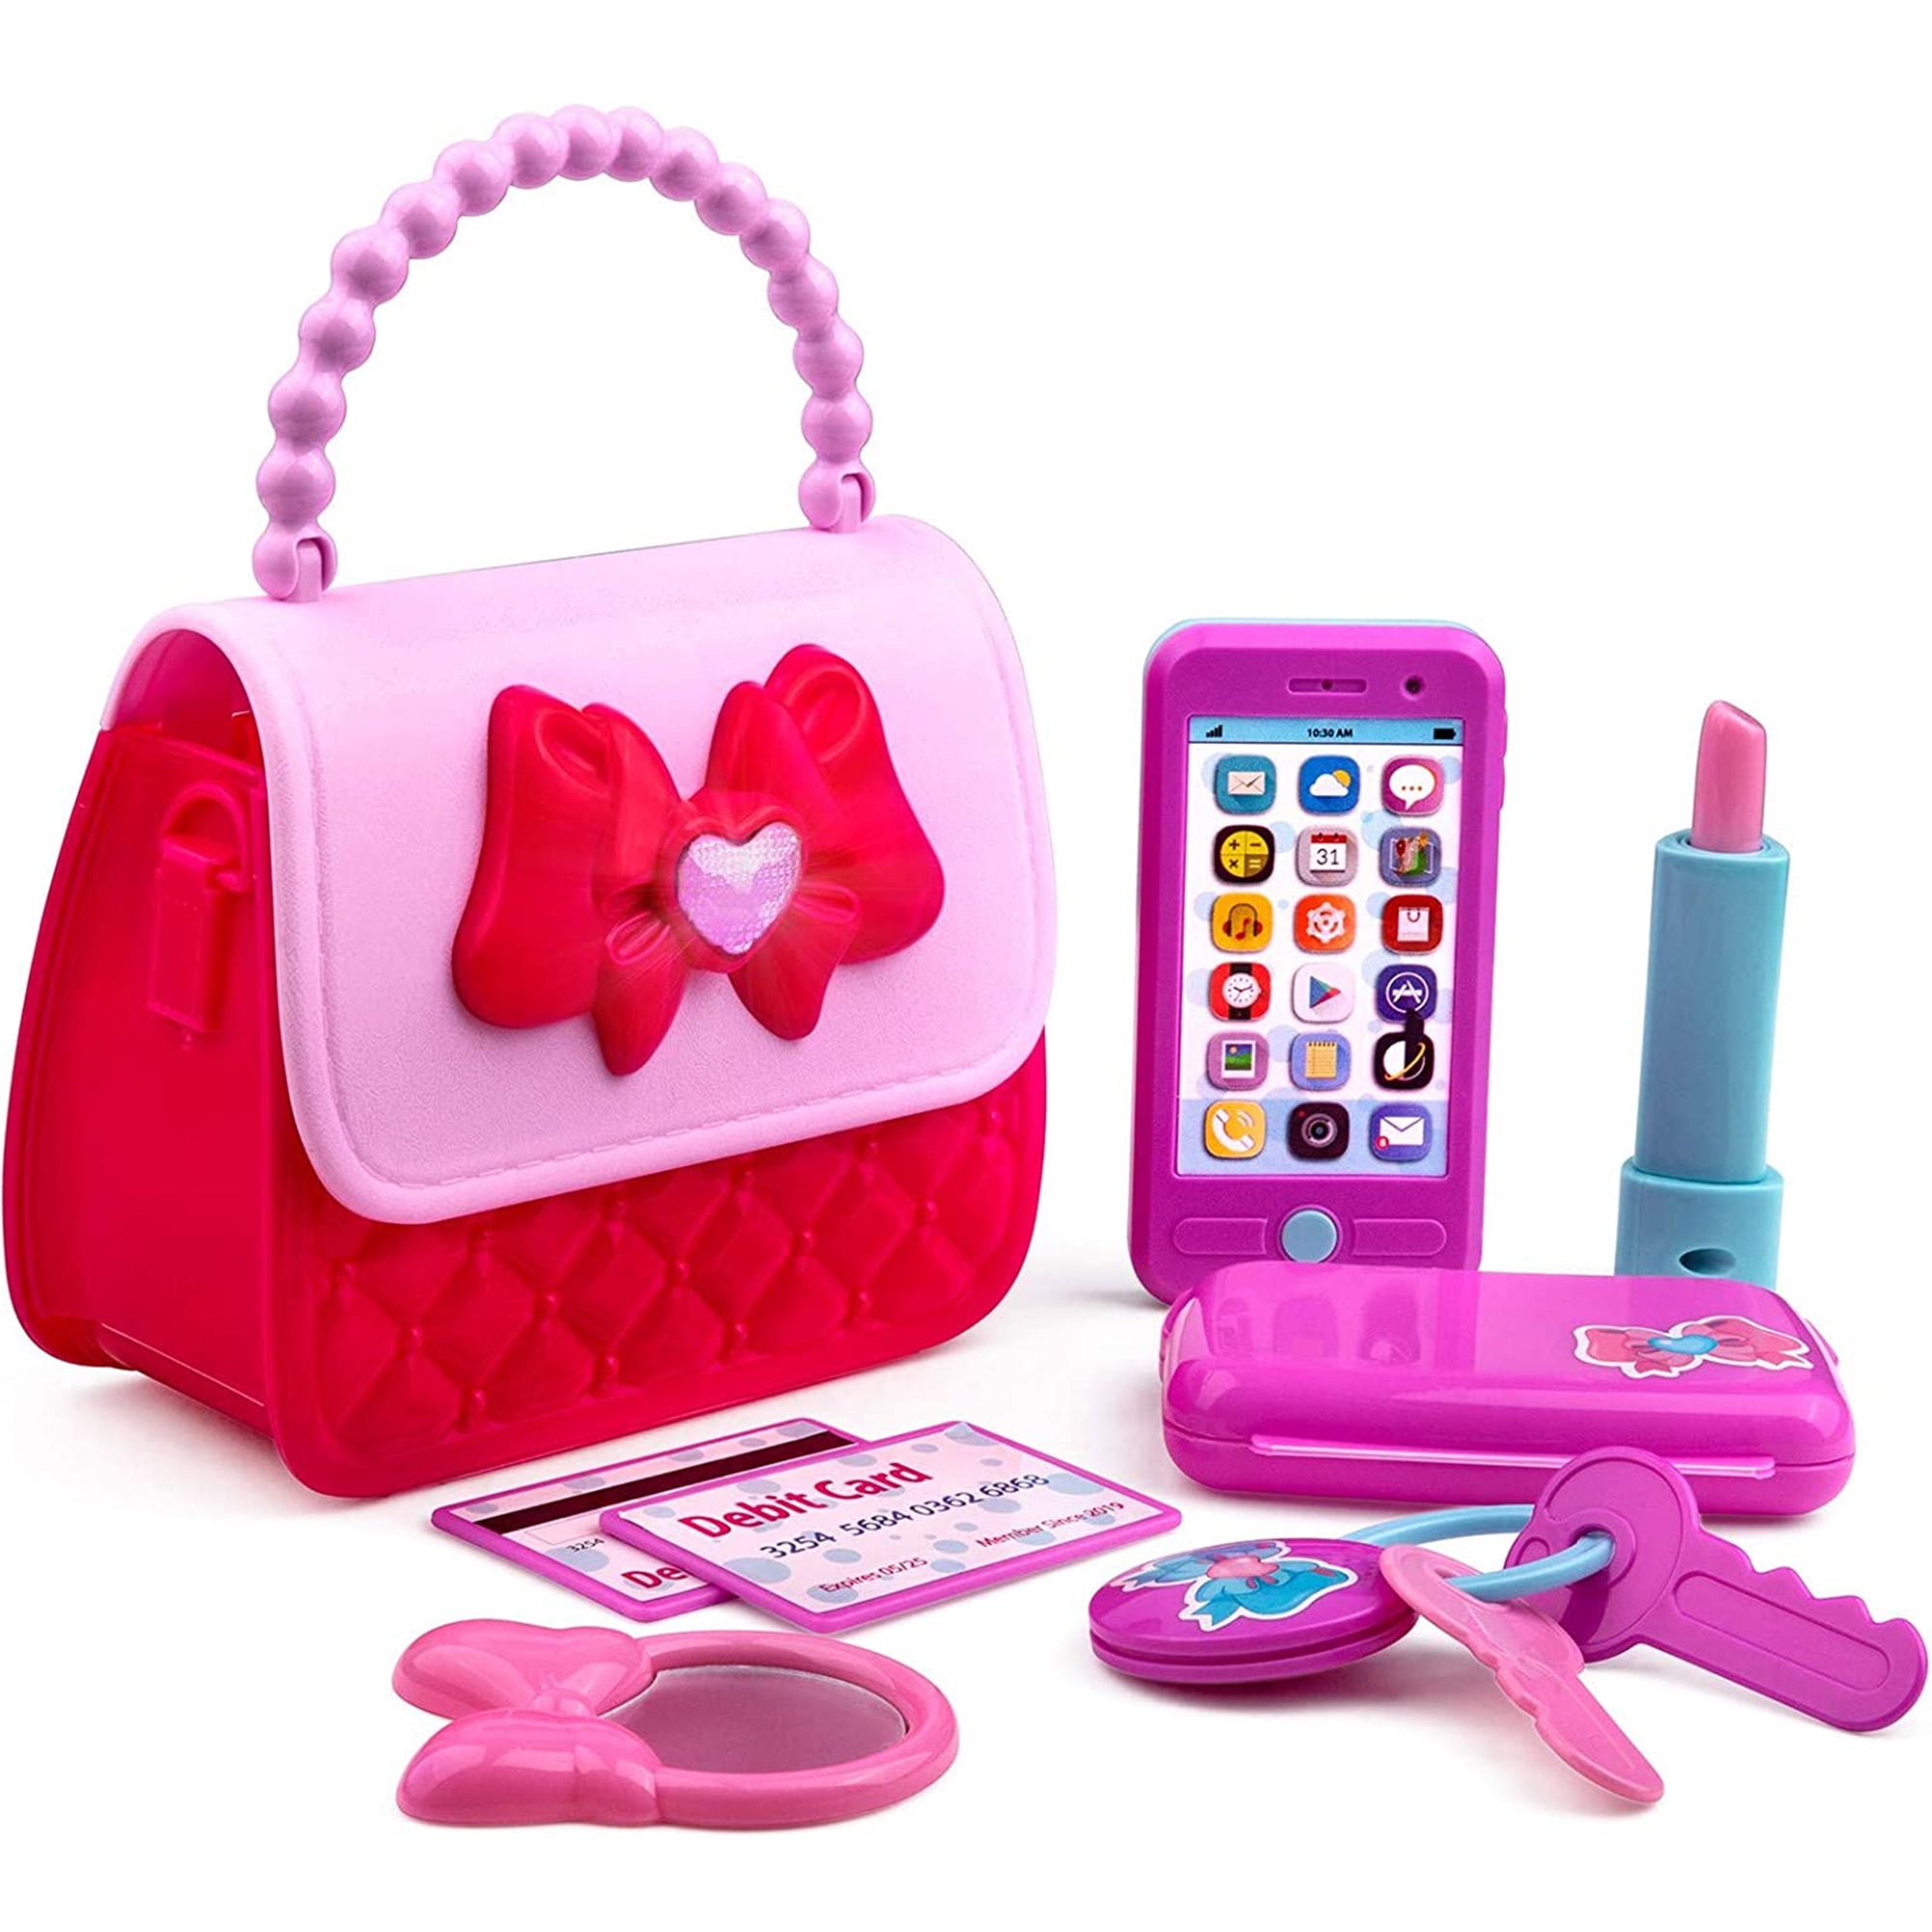 Buy Kidoozie My First Purse, Pink Online at Low Prices in India - Amazon.in